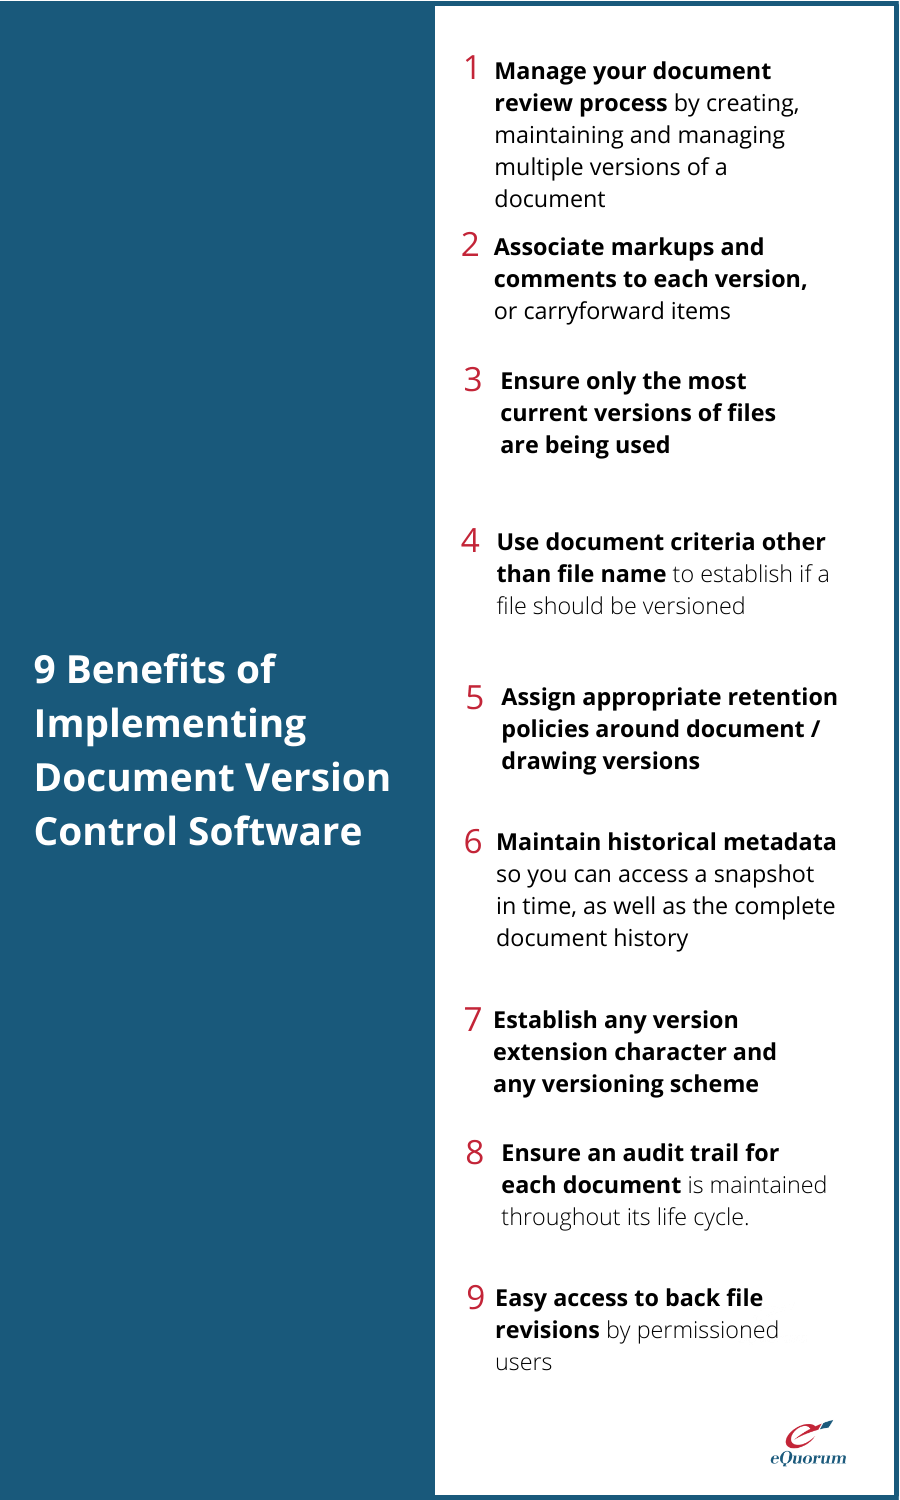 9 Benefits of Implementing Document Version Control Software